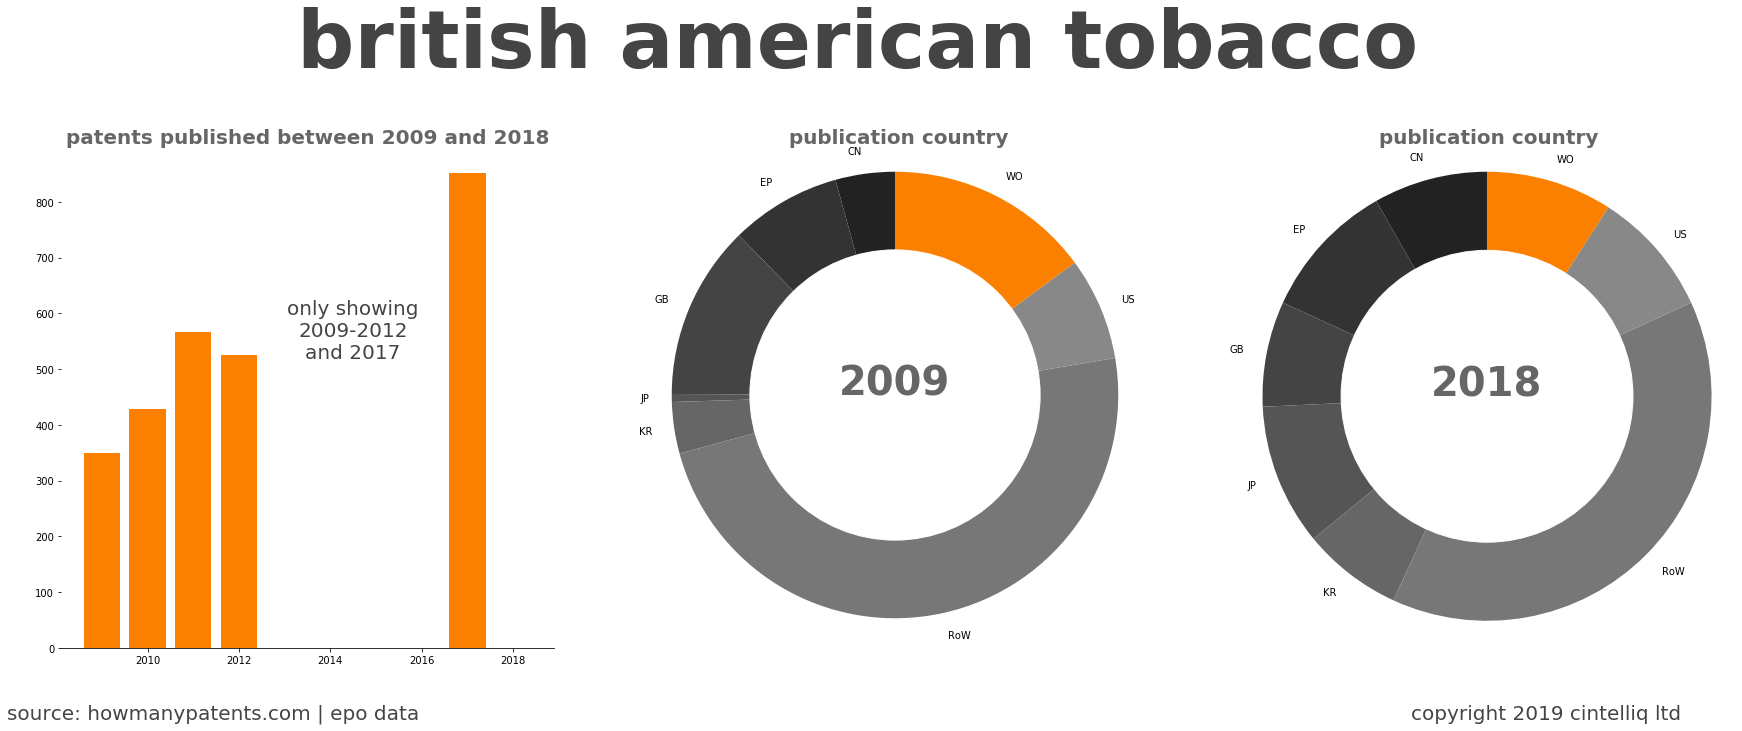 summary of patents for British American Tobacco 